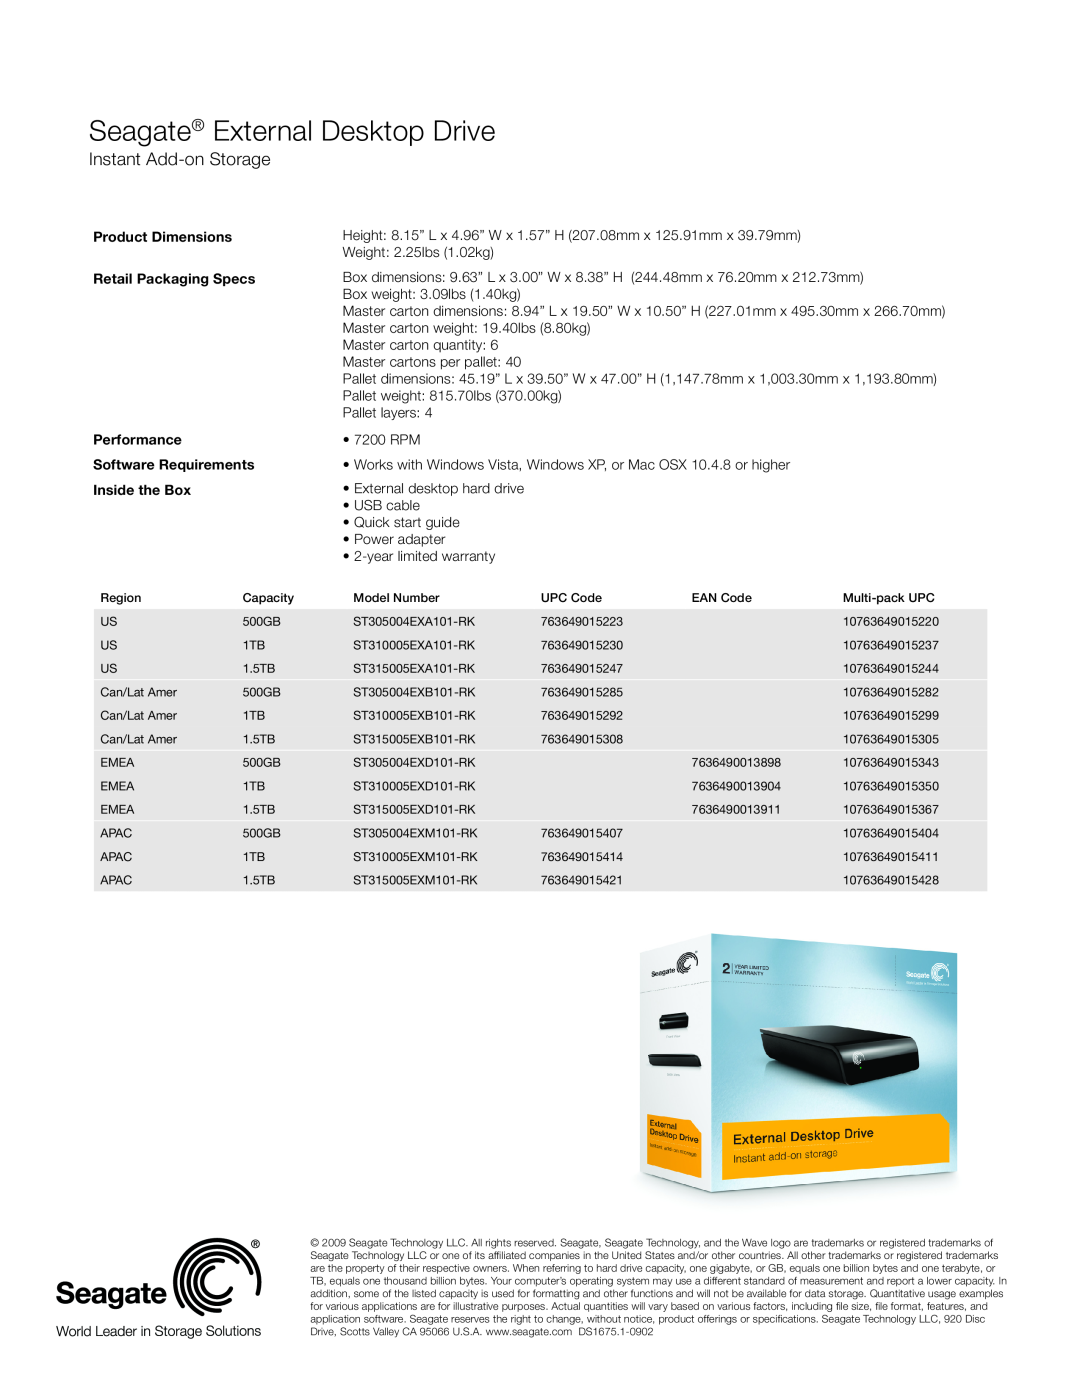 Seagate ST305004EXB101-RK Product Dimensions Retail Packaging Specs Performance, Software Requirements Inside the Box 